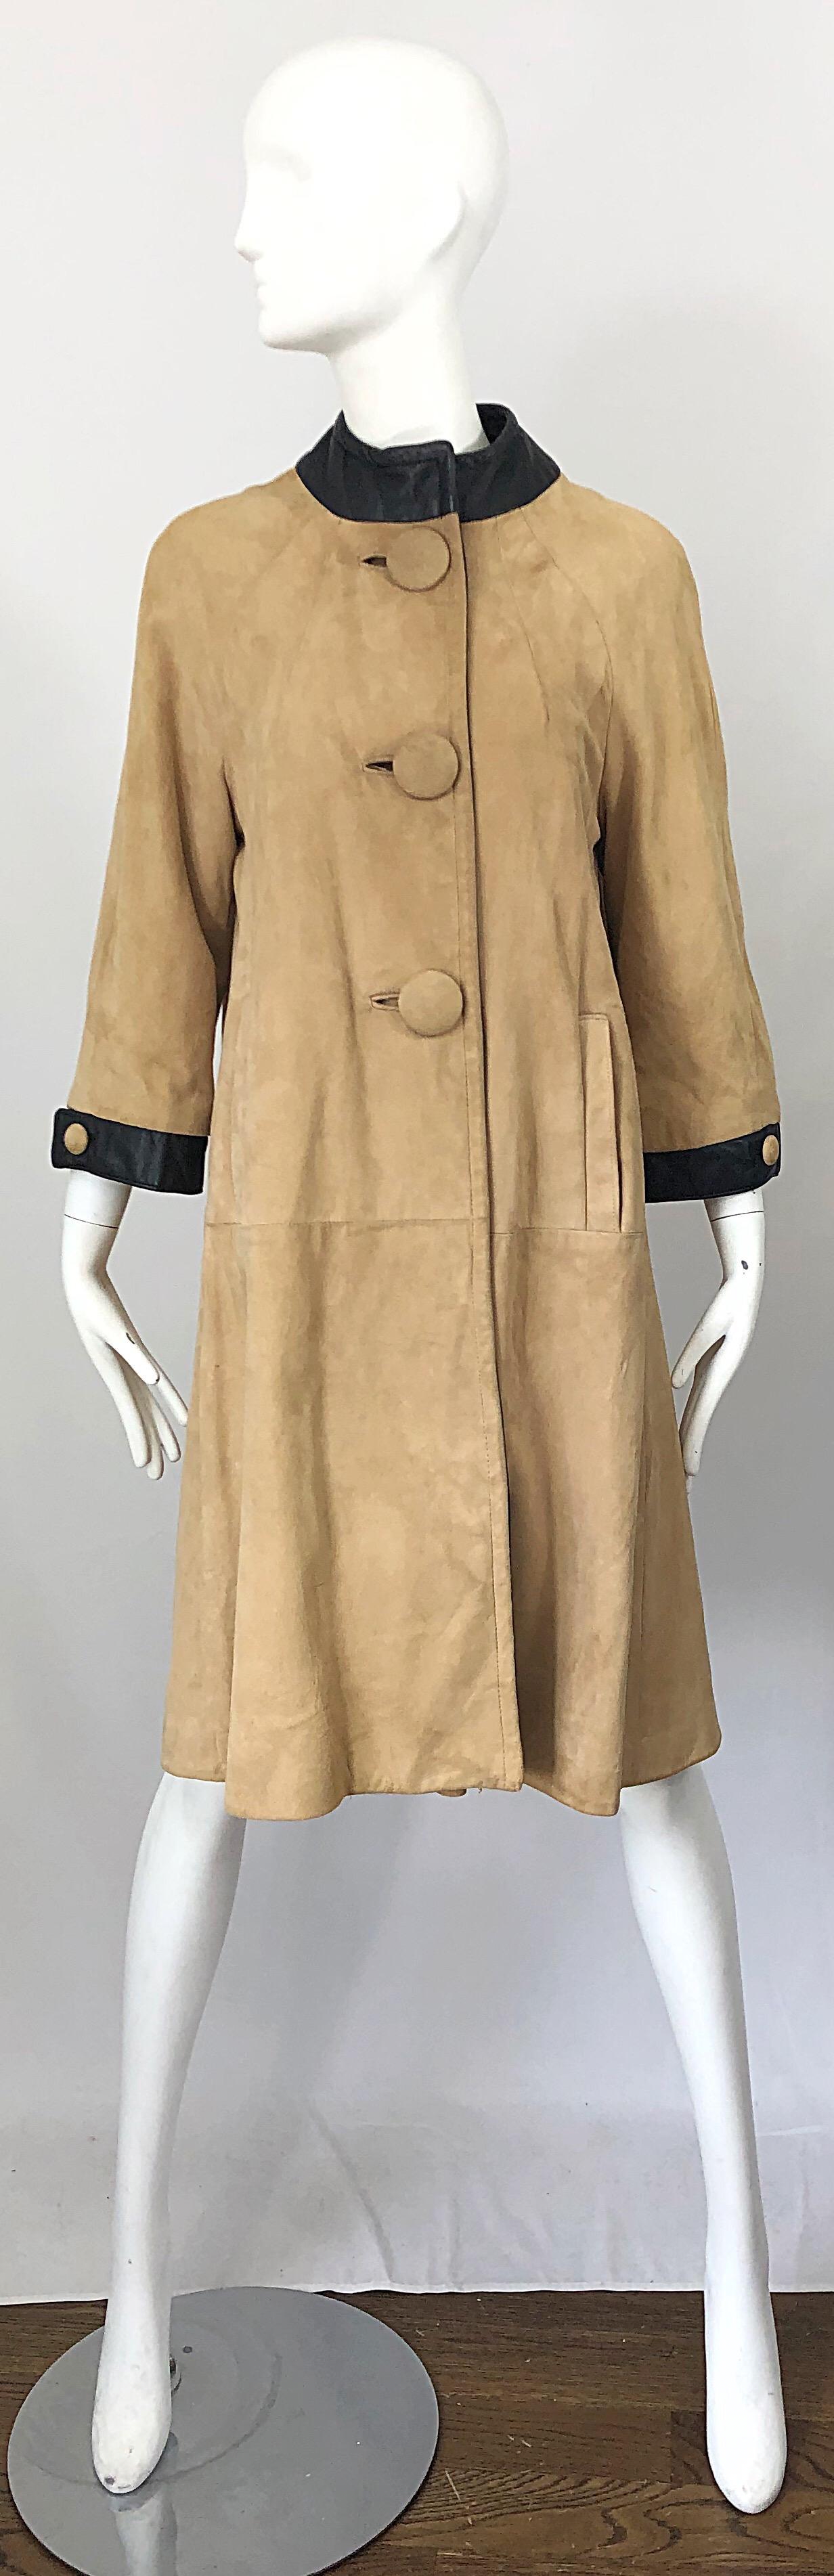 Chic 60s LILLIE RUBIN tan suede and black leather vintage swing jacket ! Features three large suede covered buttons up the front. Black leather trim on the collar and at each sleeve cuff. Fully lined. Great easy shape to wear. Super soft luxurious